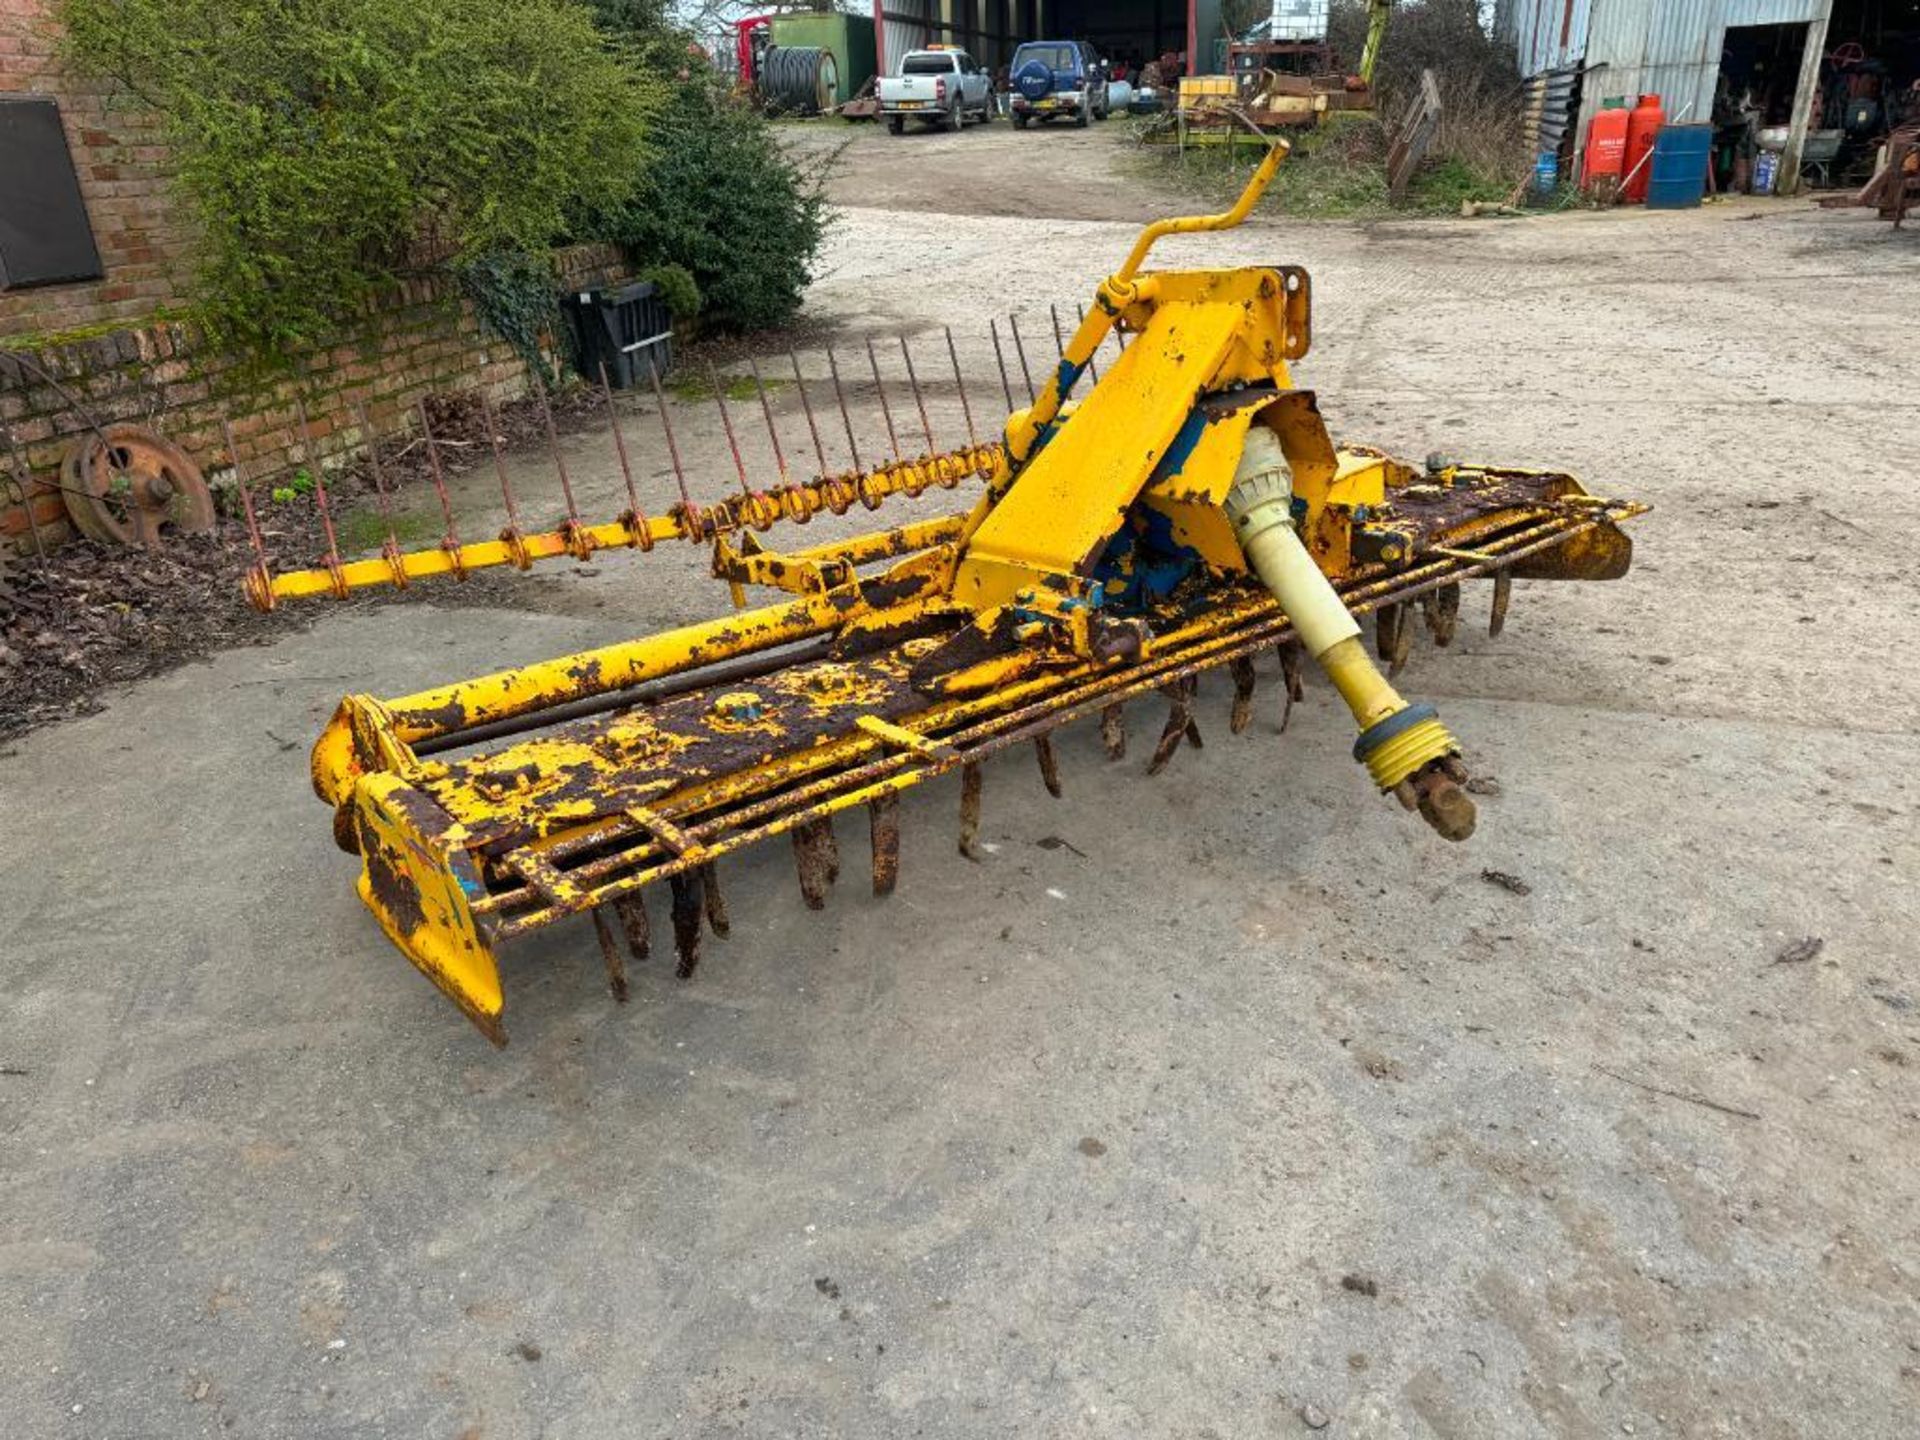 Falc 3m power harrow with rear crumbler roller, linkage mounted - Image 5 of 9